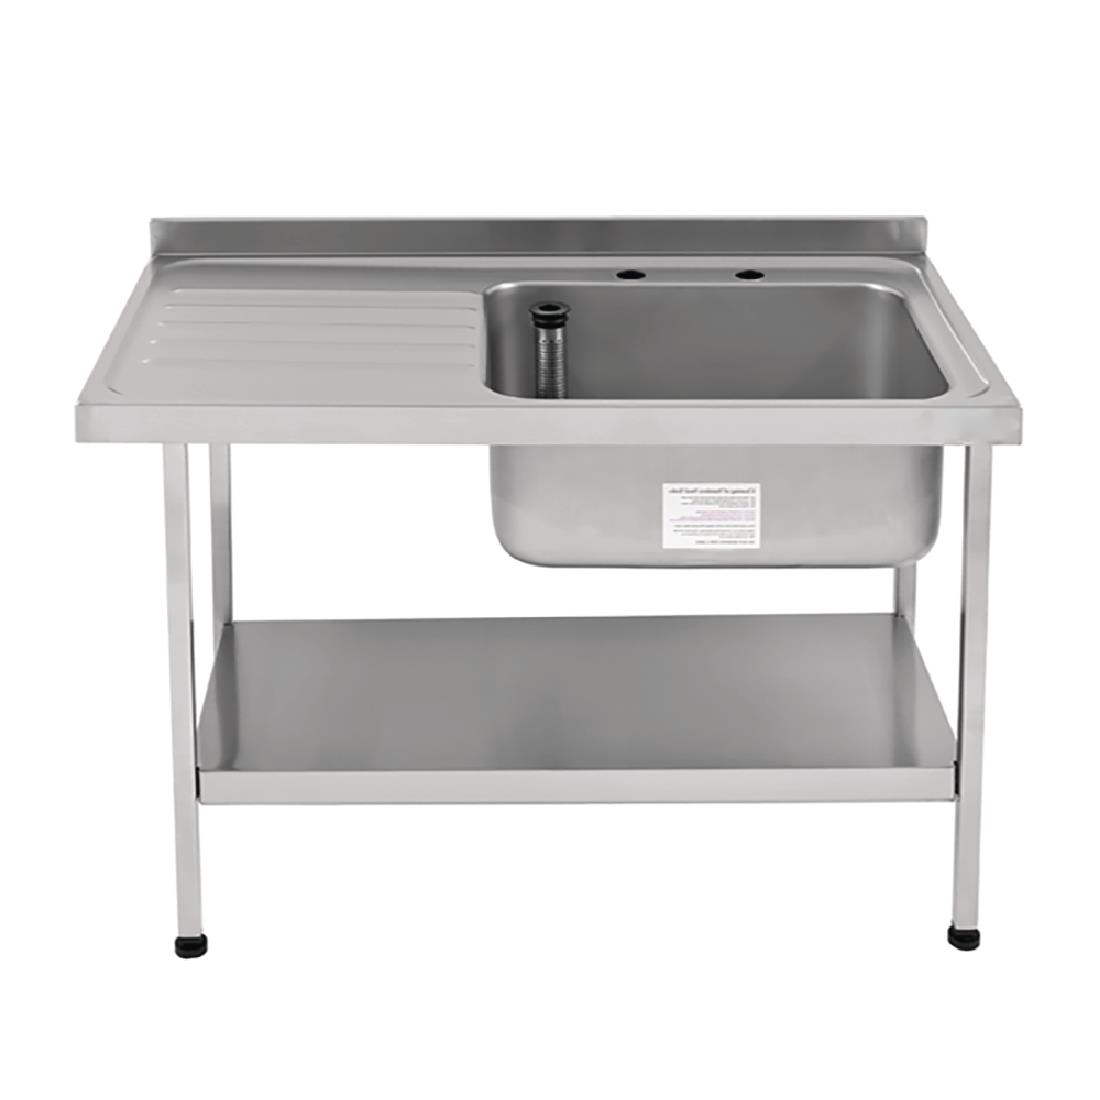 KWC DVS Self Assembly Stainless Steel Sink Left Hand Drainer 1200x650mm